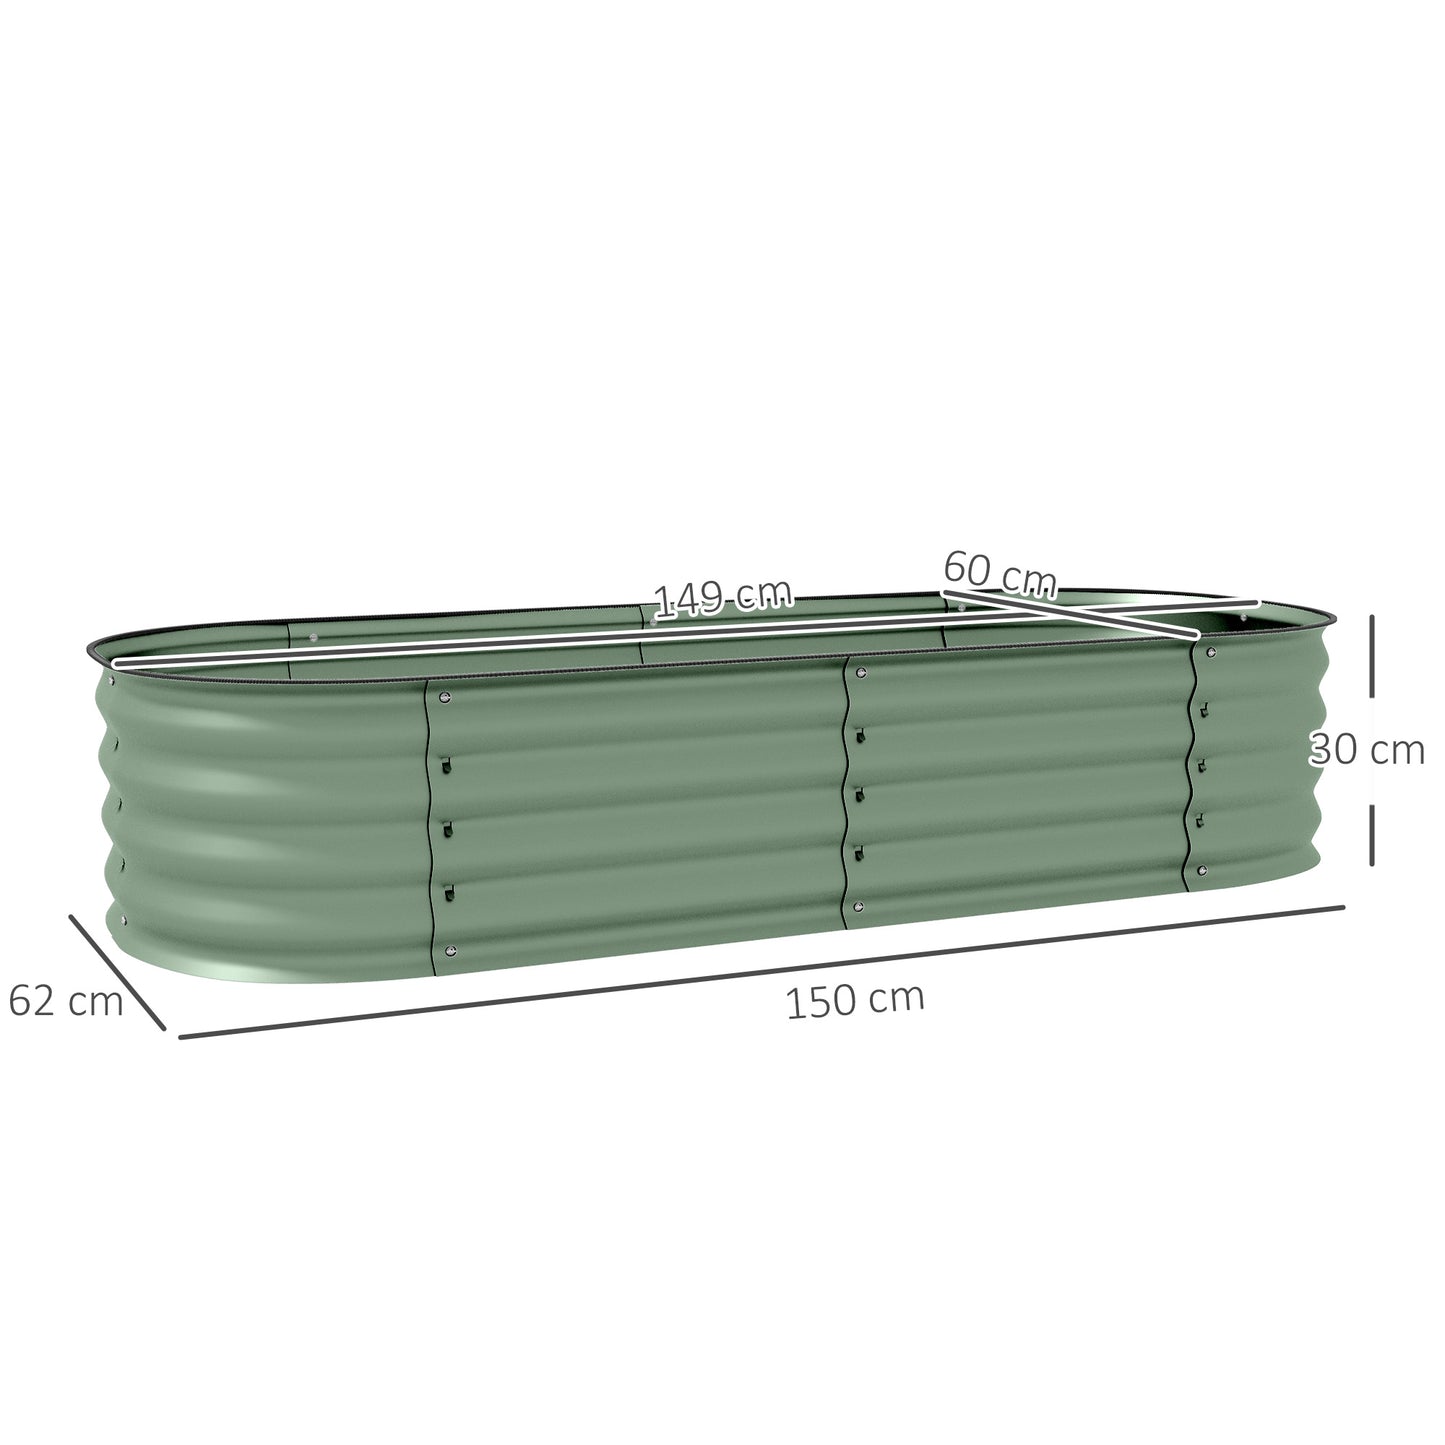 Outsunny Galvanised Raised Garden Bed, Metal Planter Box with Safety Edging, for Flowers, Herbs, Succulents, Green